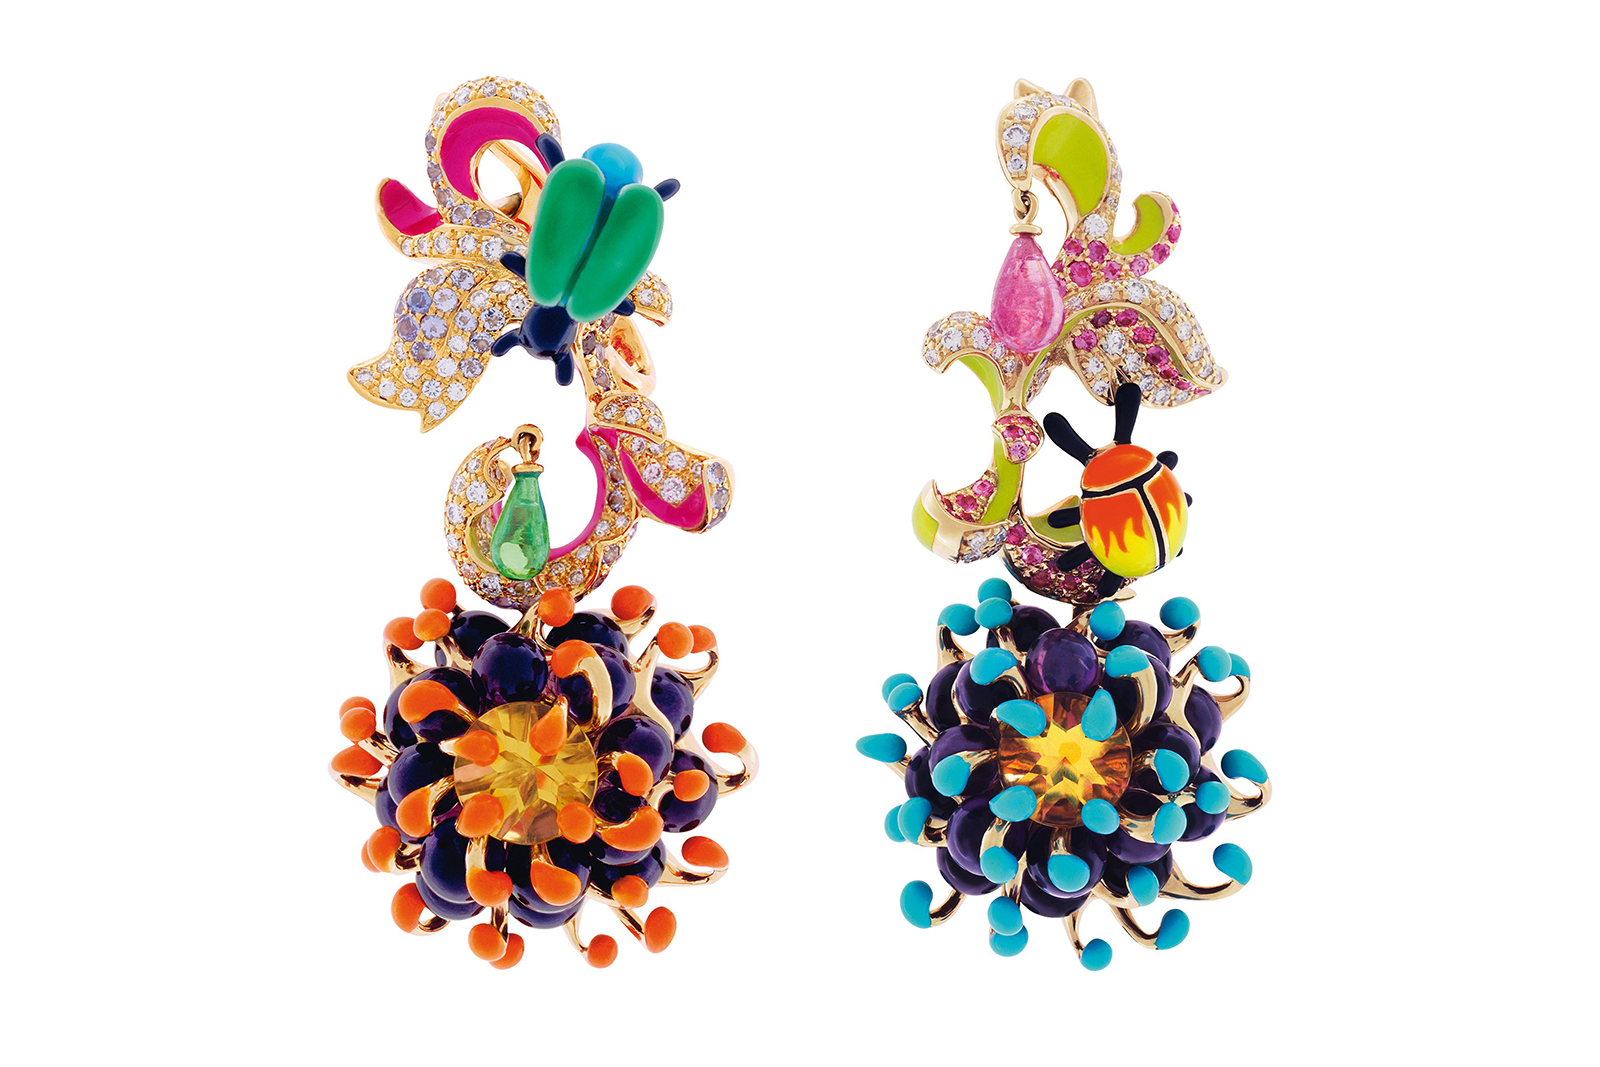 Dior ‘Milly Carnivora Egratigna Angélique' earrings with lacquer, diamonds, sapphires, emerald and citrine in 18k yellow gold